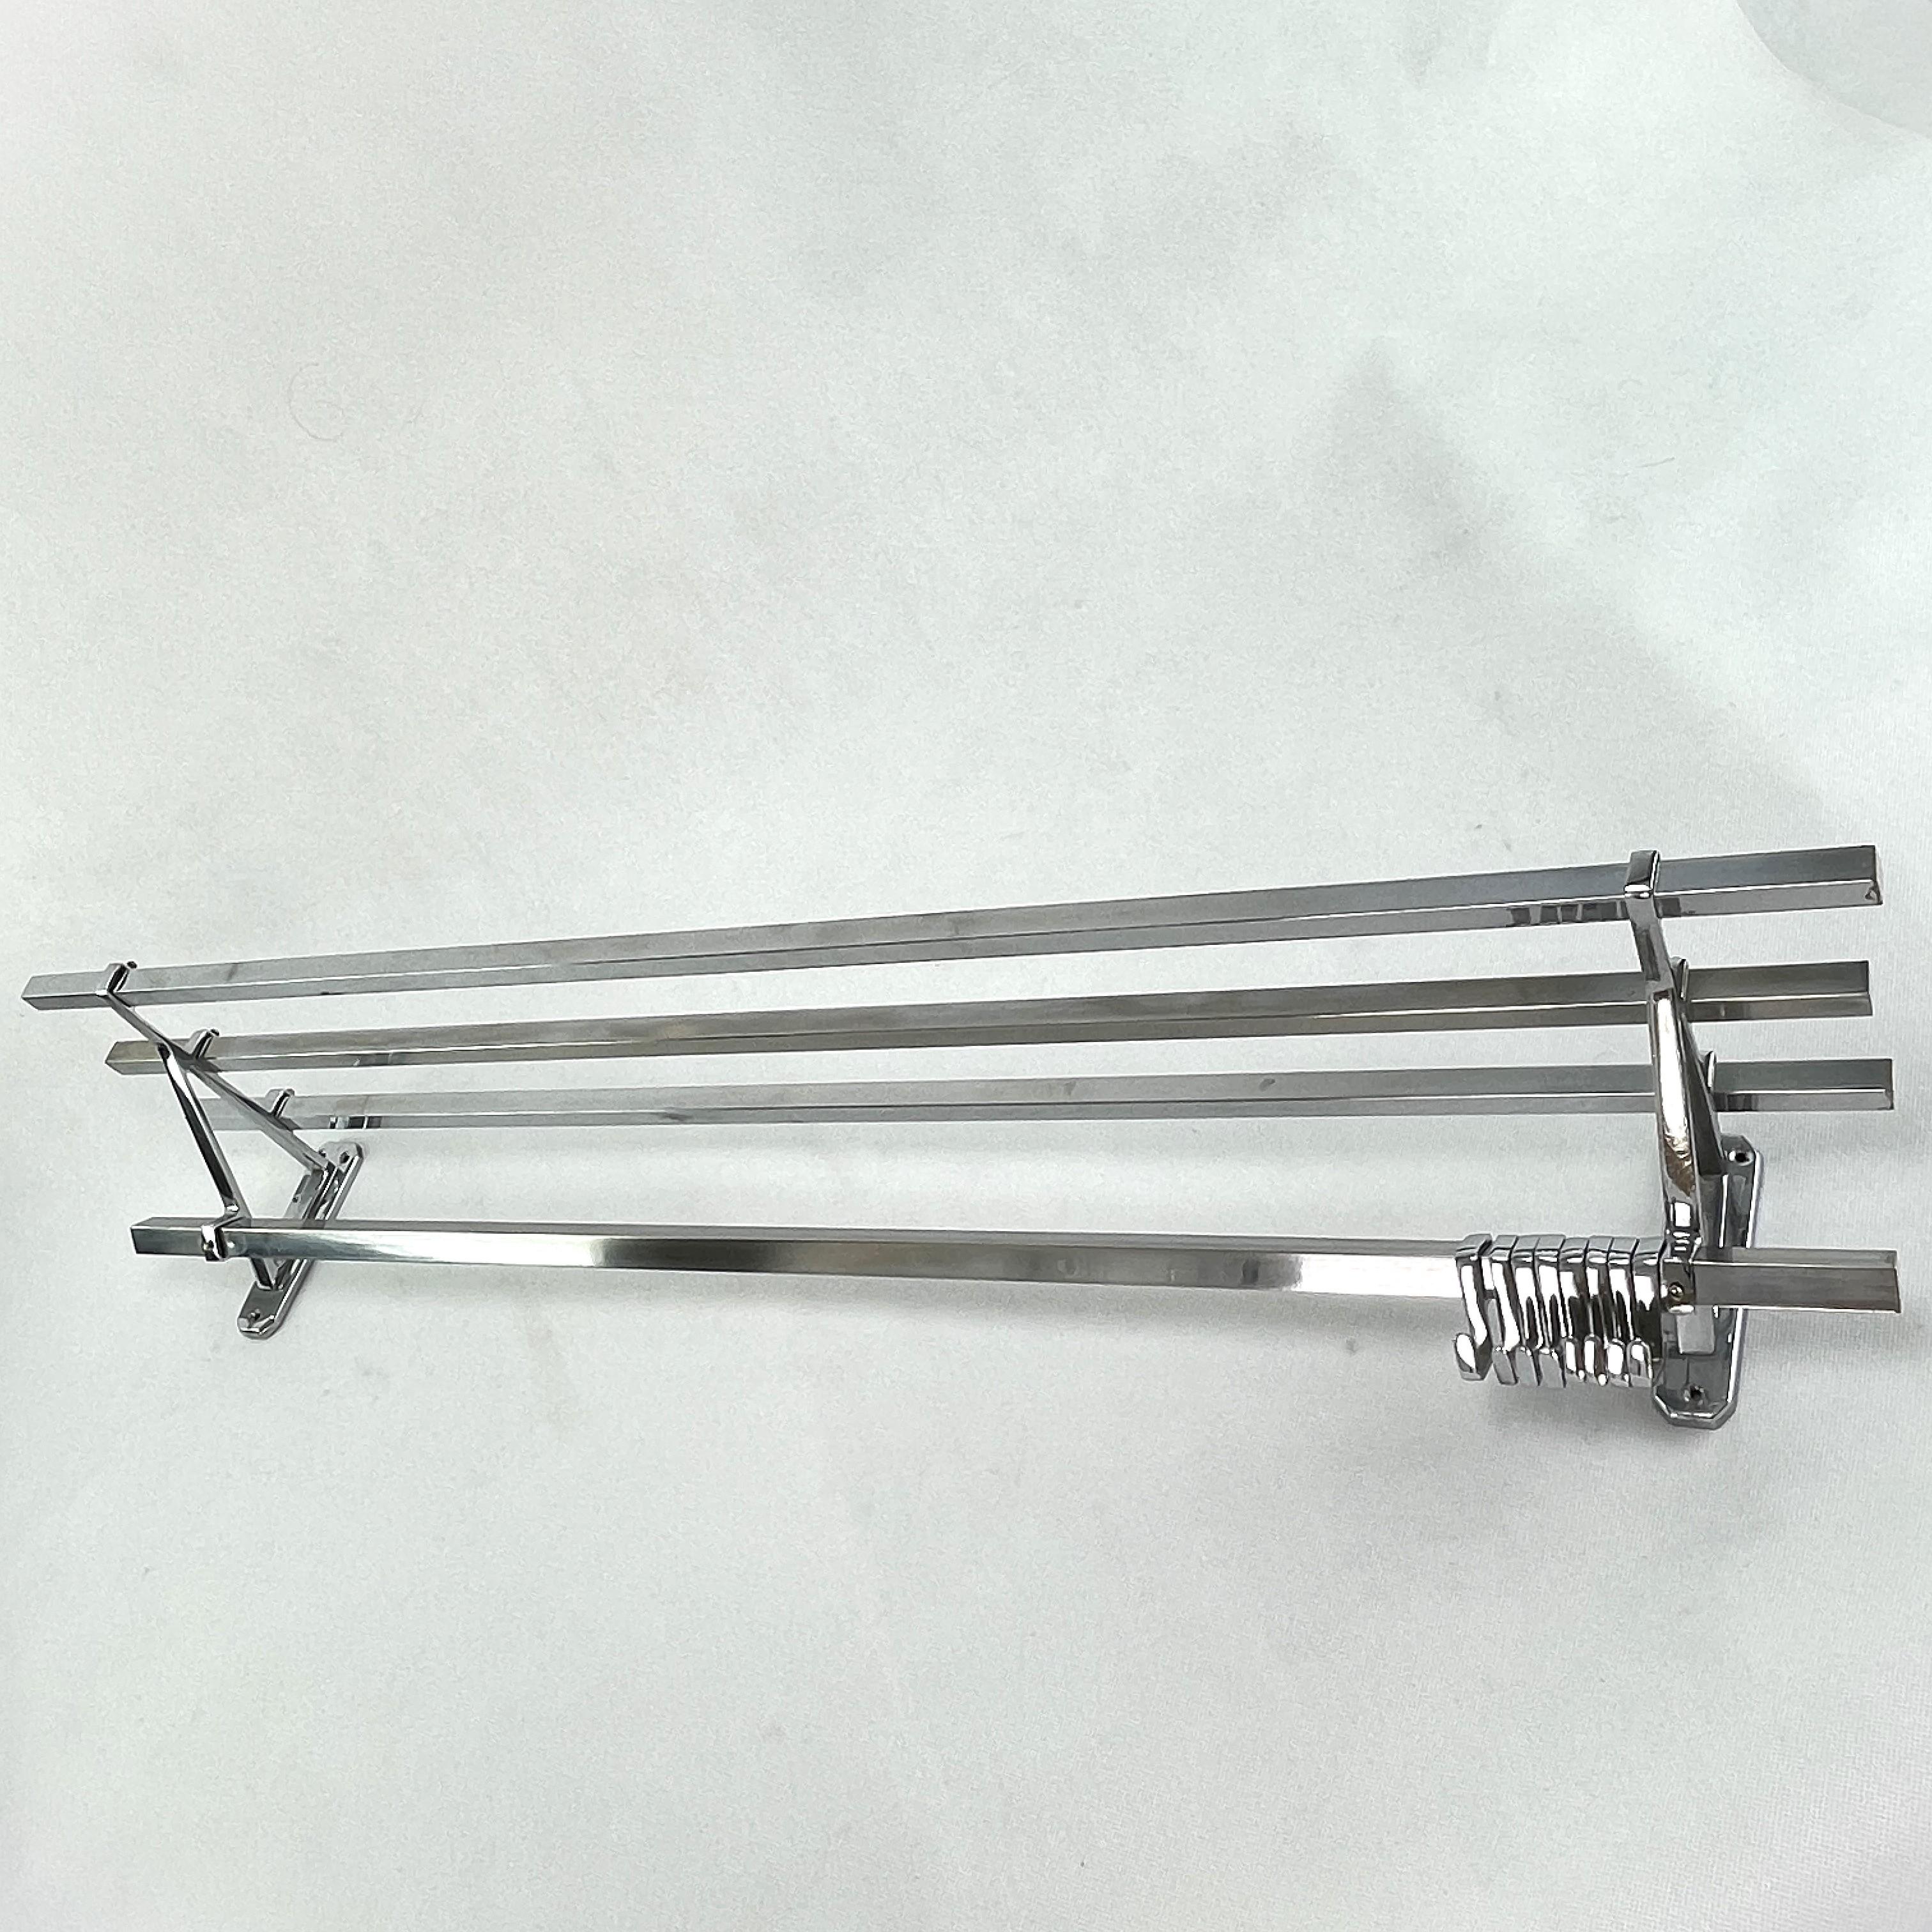 Art Deco wardrobe chrome - 1930s

This beautiful french wall coat rack from the 1930s is in the streamline modern Art Deco style. This style emphasized curvy streamlined shapes. This is a beautiful, timeless and antique piece that will leave a